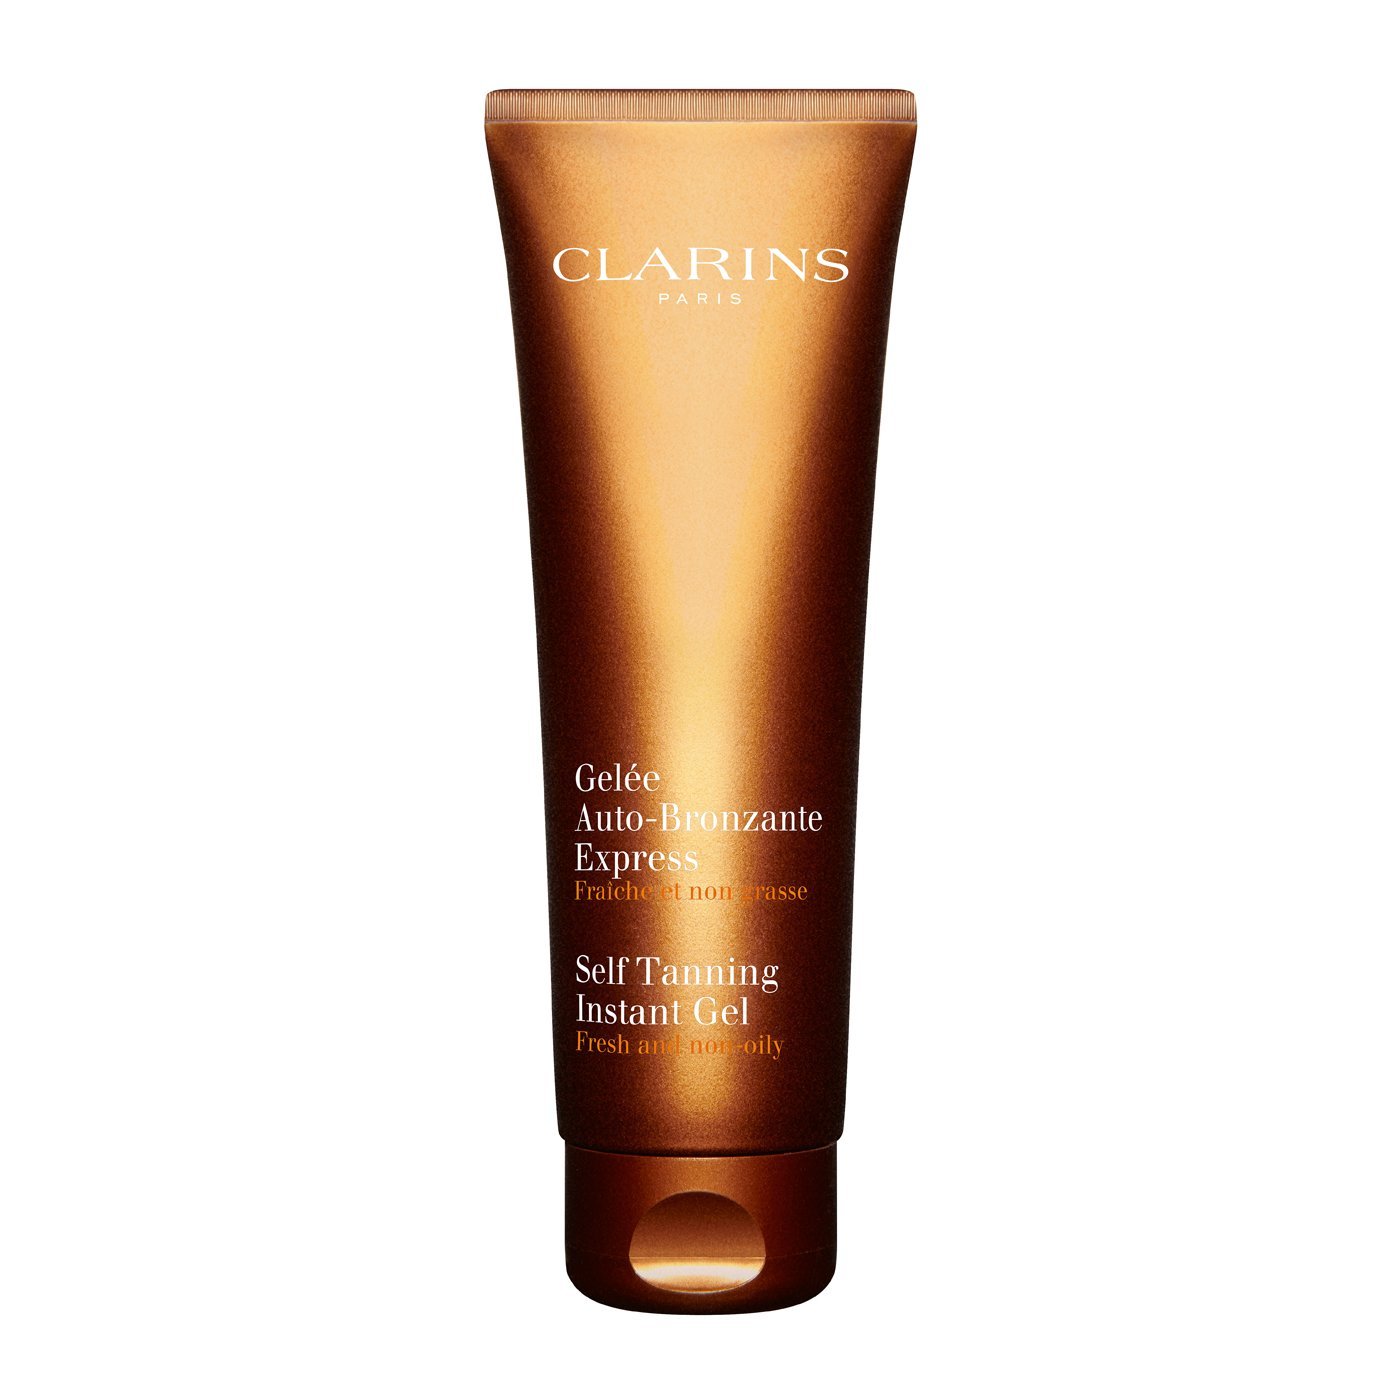 clarins self tanning instant gel reviews